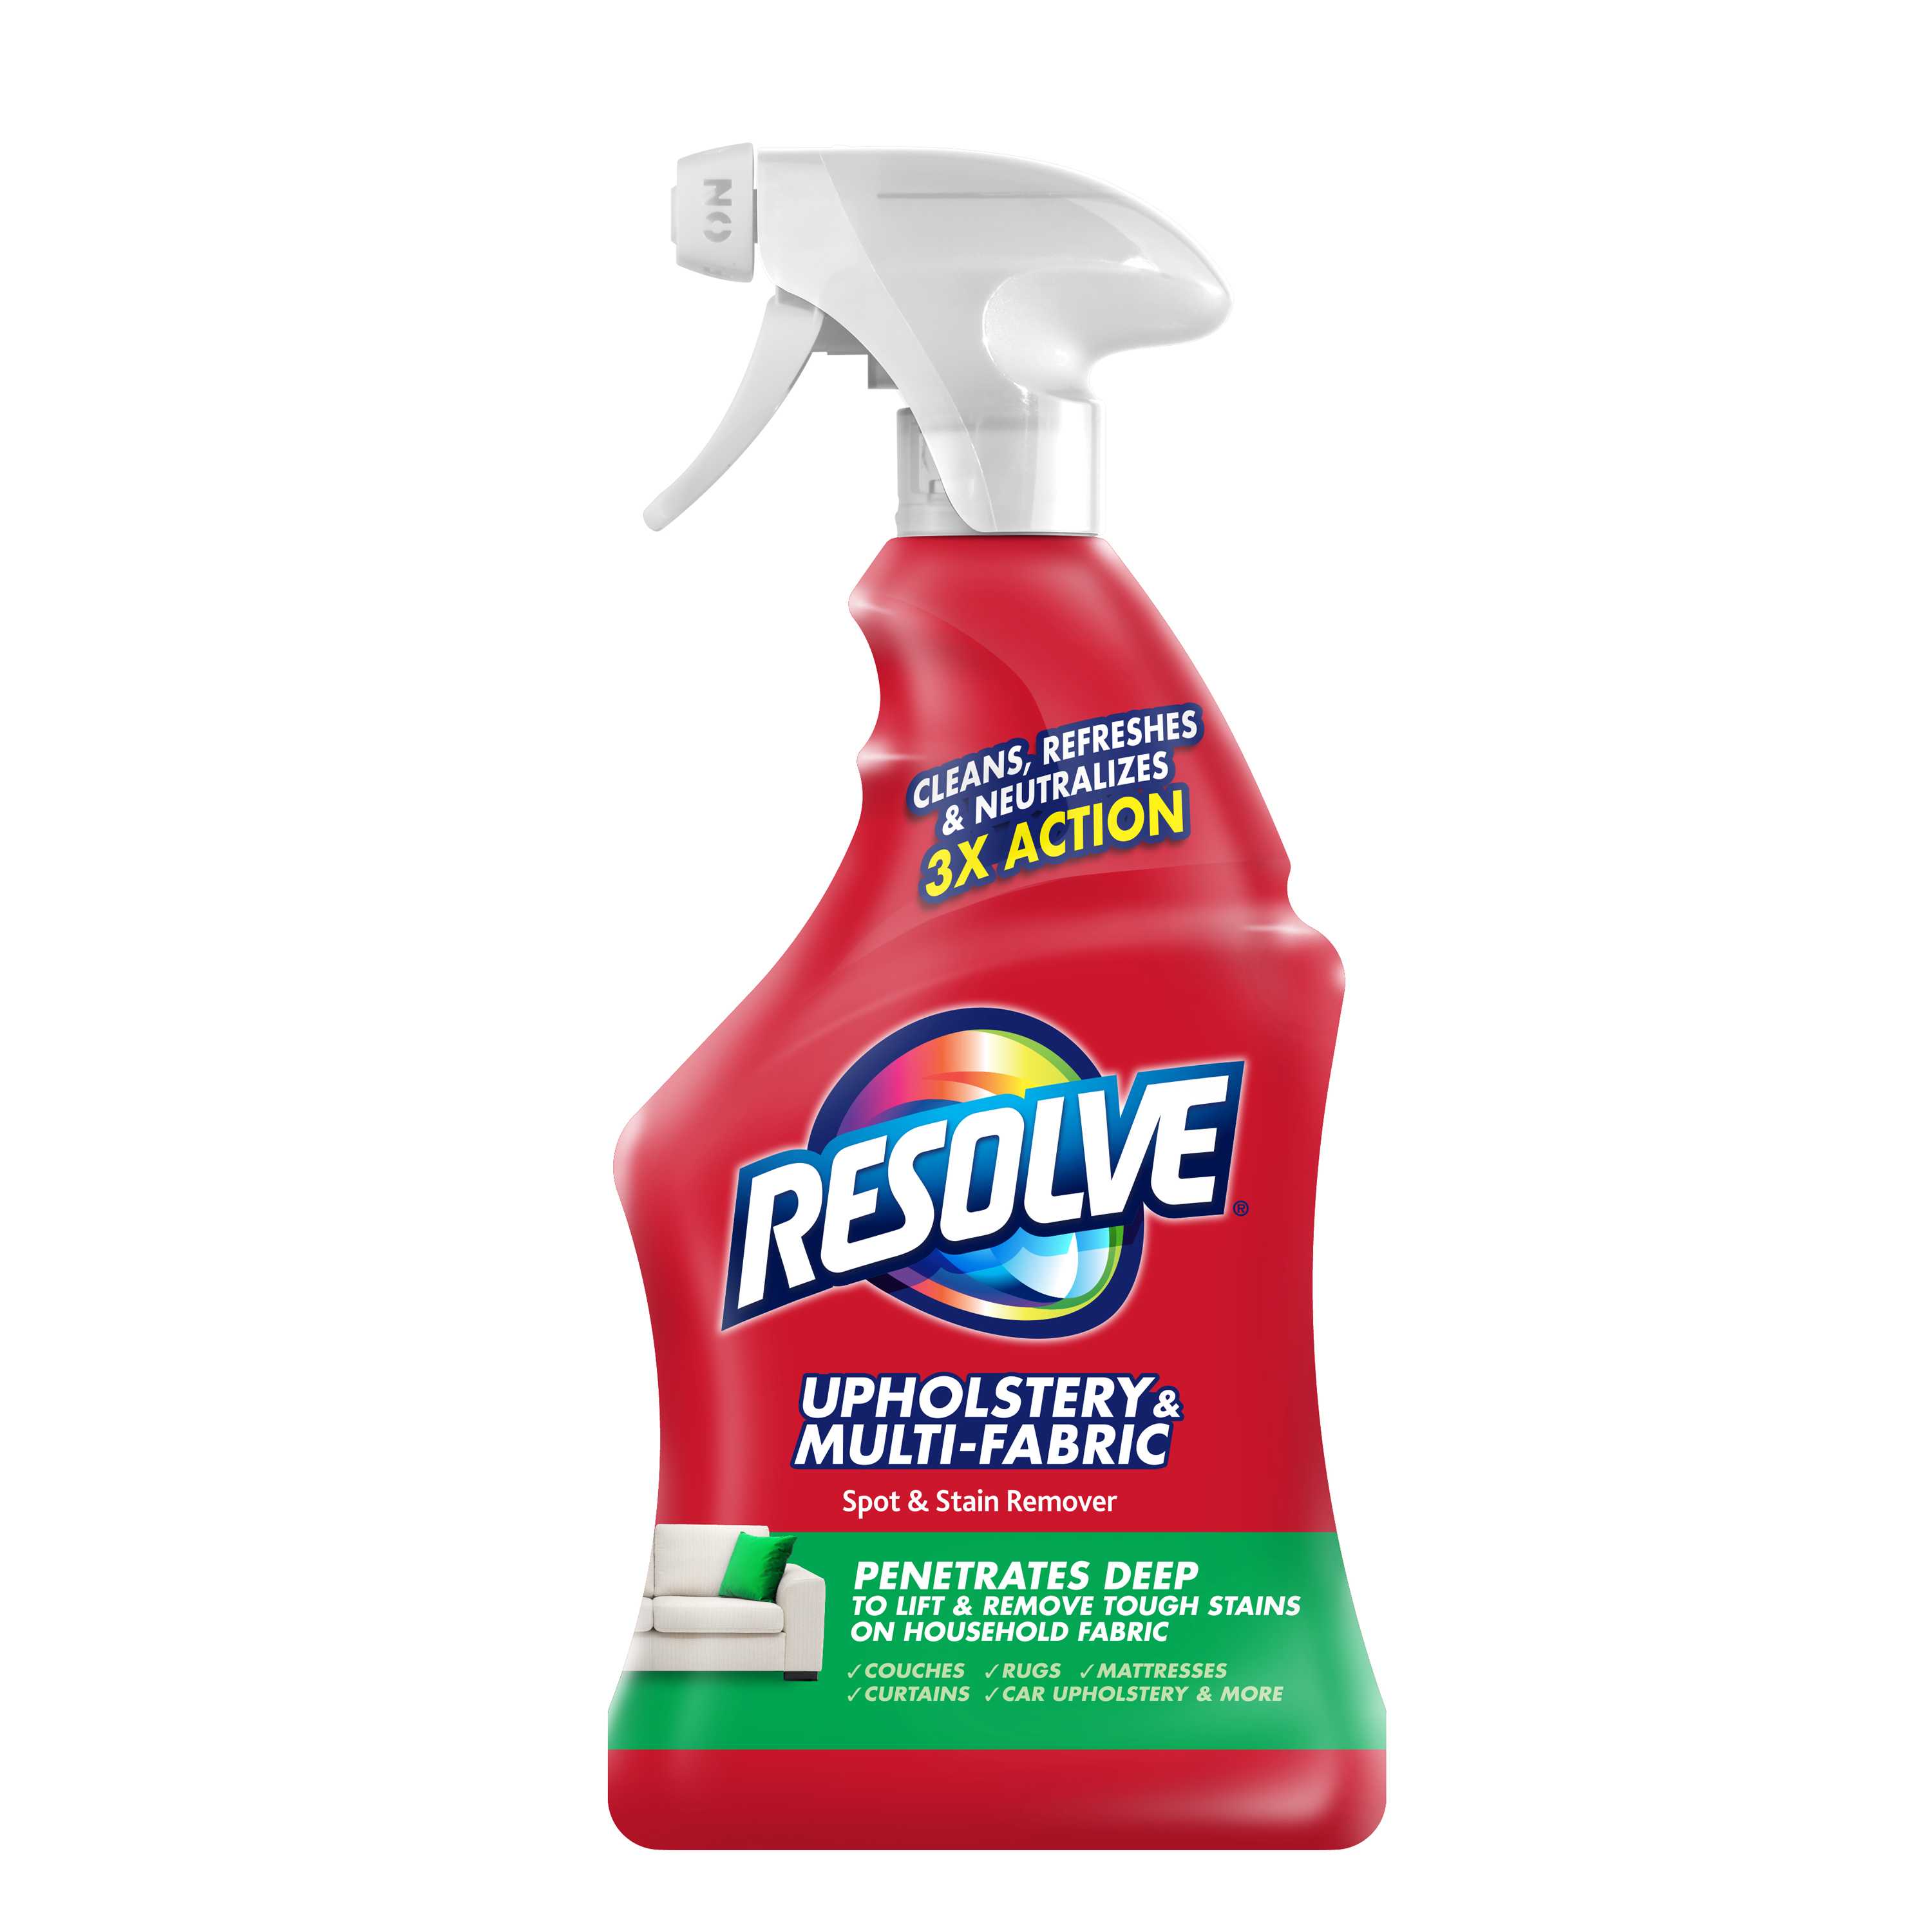 Resolve® Upholstery & Multi-Fabric Spot & Stain Remover